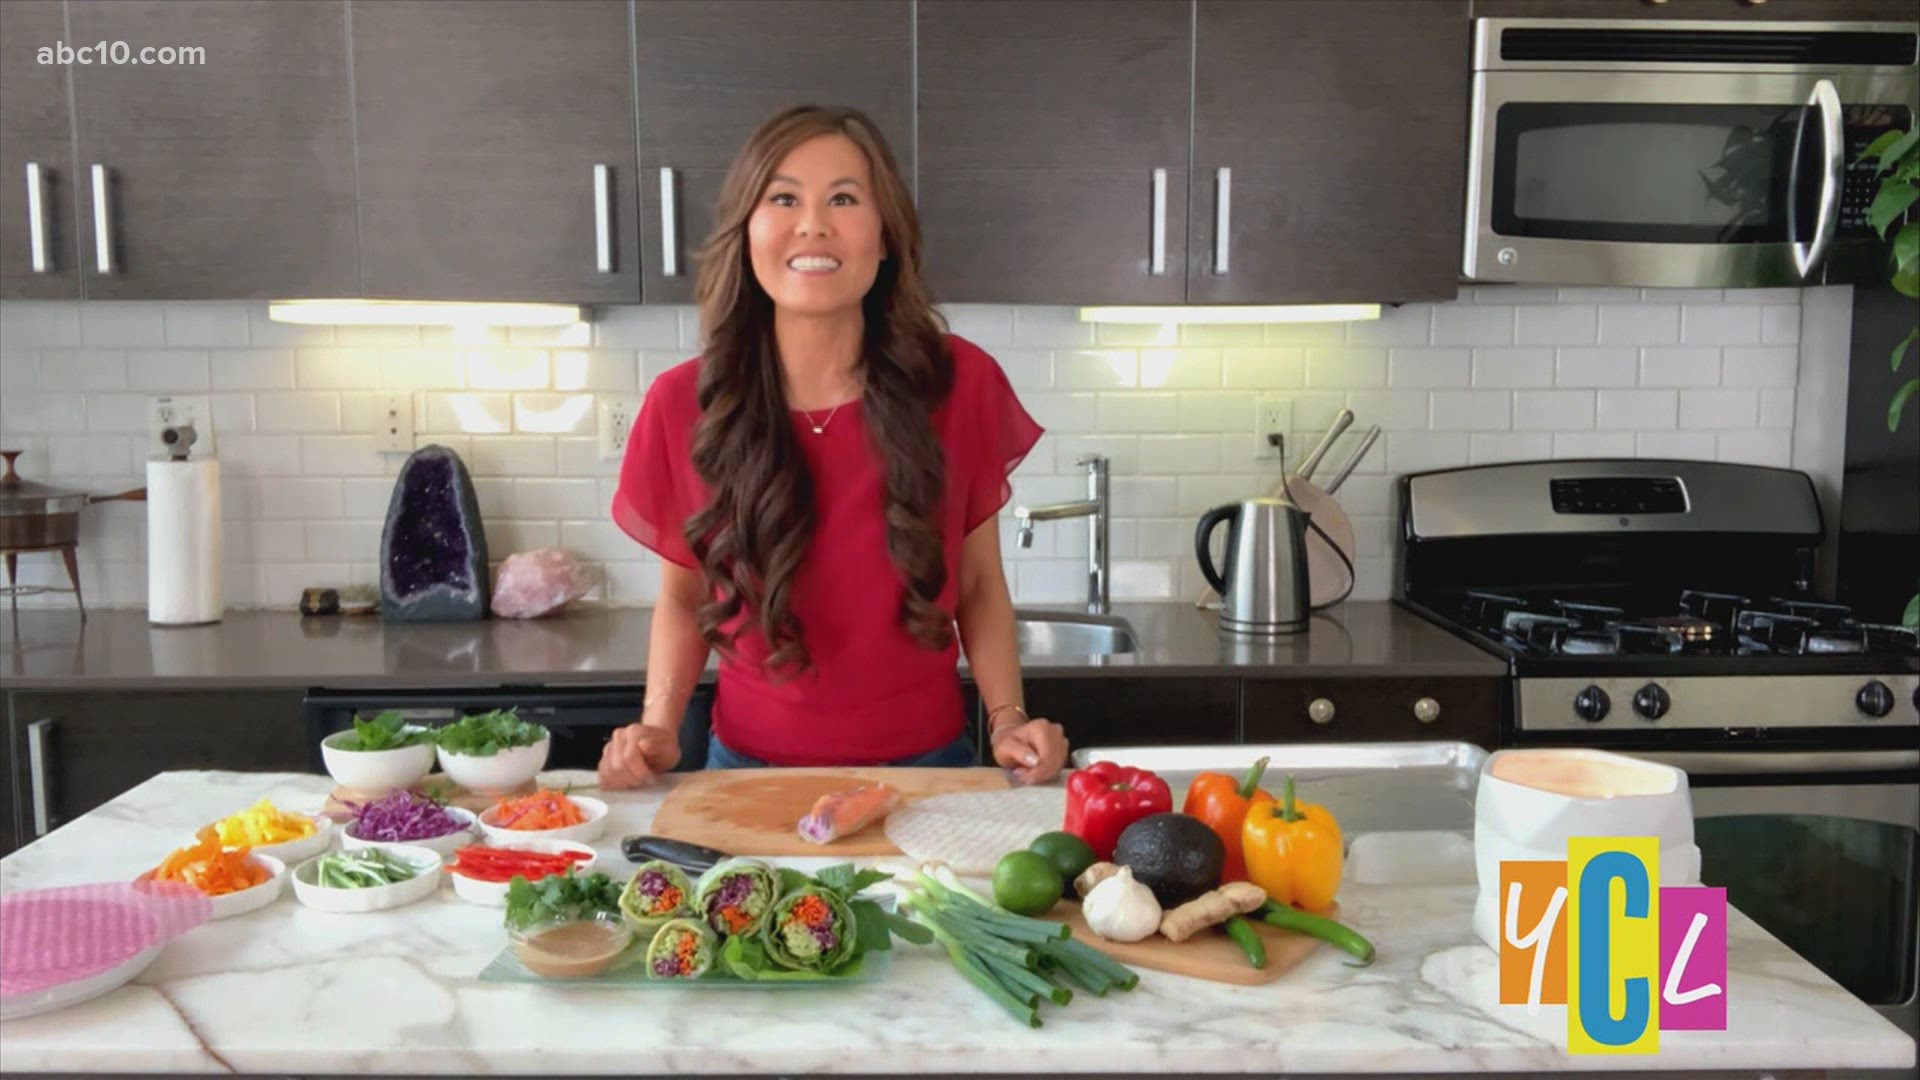 Celeb Chef Serena Poon advises eating the rainbow with fruits and vegetables of different colors everyday, and shares her recipe for "Rainbow Summer Rolls."